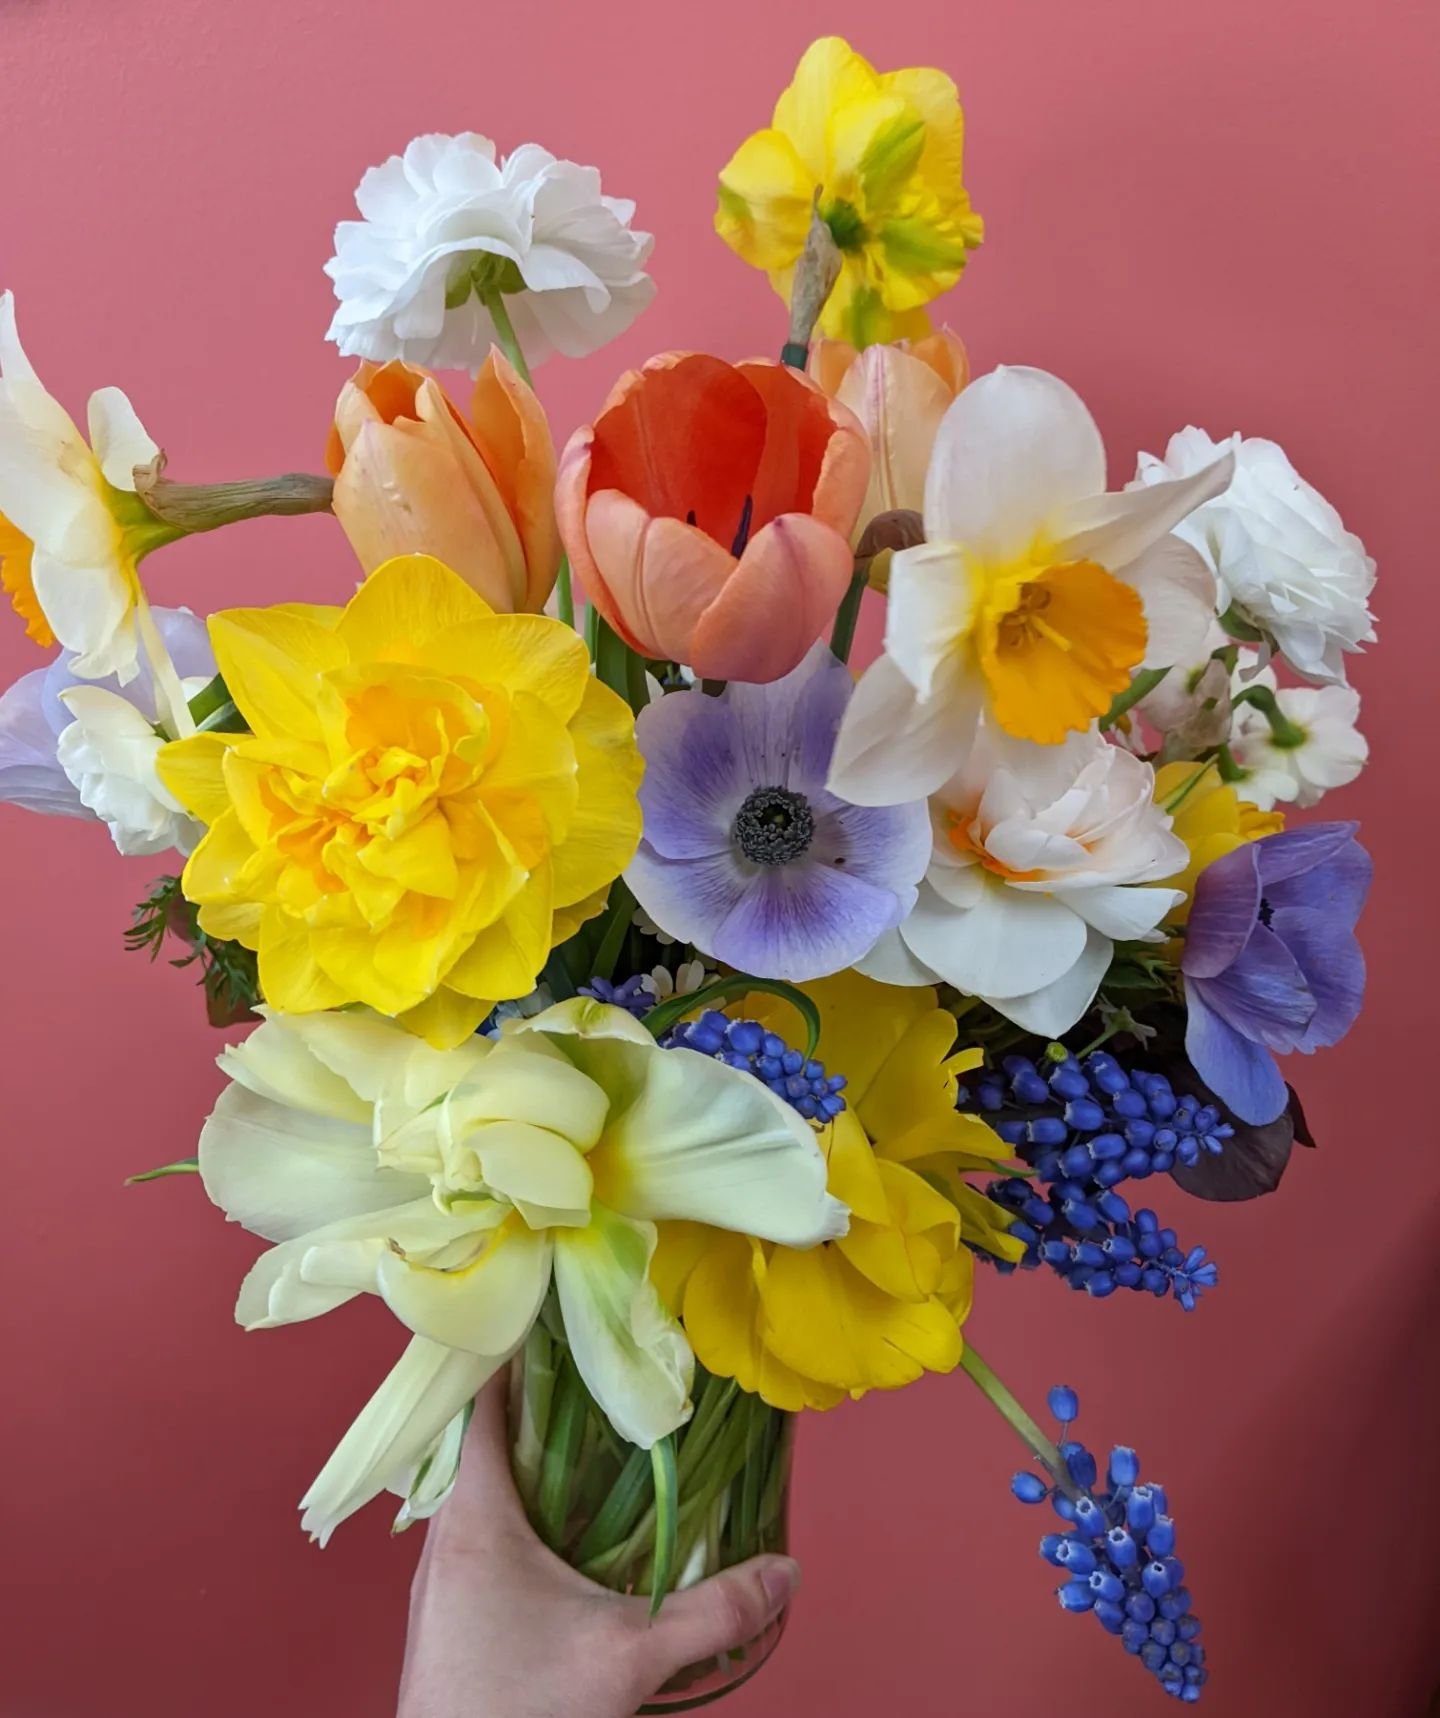 *Mother's Day Countdown: 12 days*. Today is the last day to save 10% on your flower preorder so get to it. The store is getting real full with great gifts for Mom, Grad, Little Dancers, and more. Open with extended hours for the next 2 weeks.  Also, 